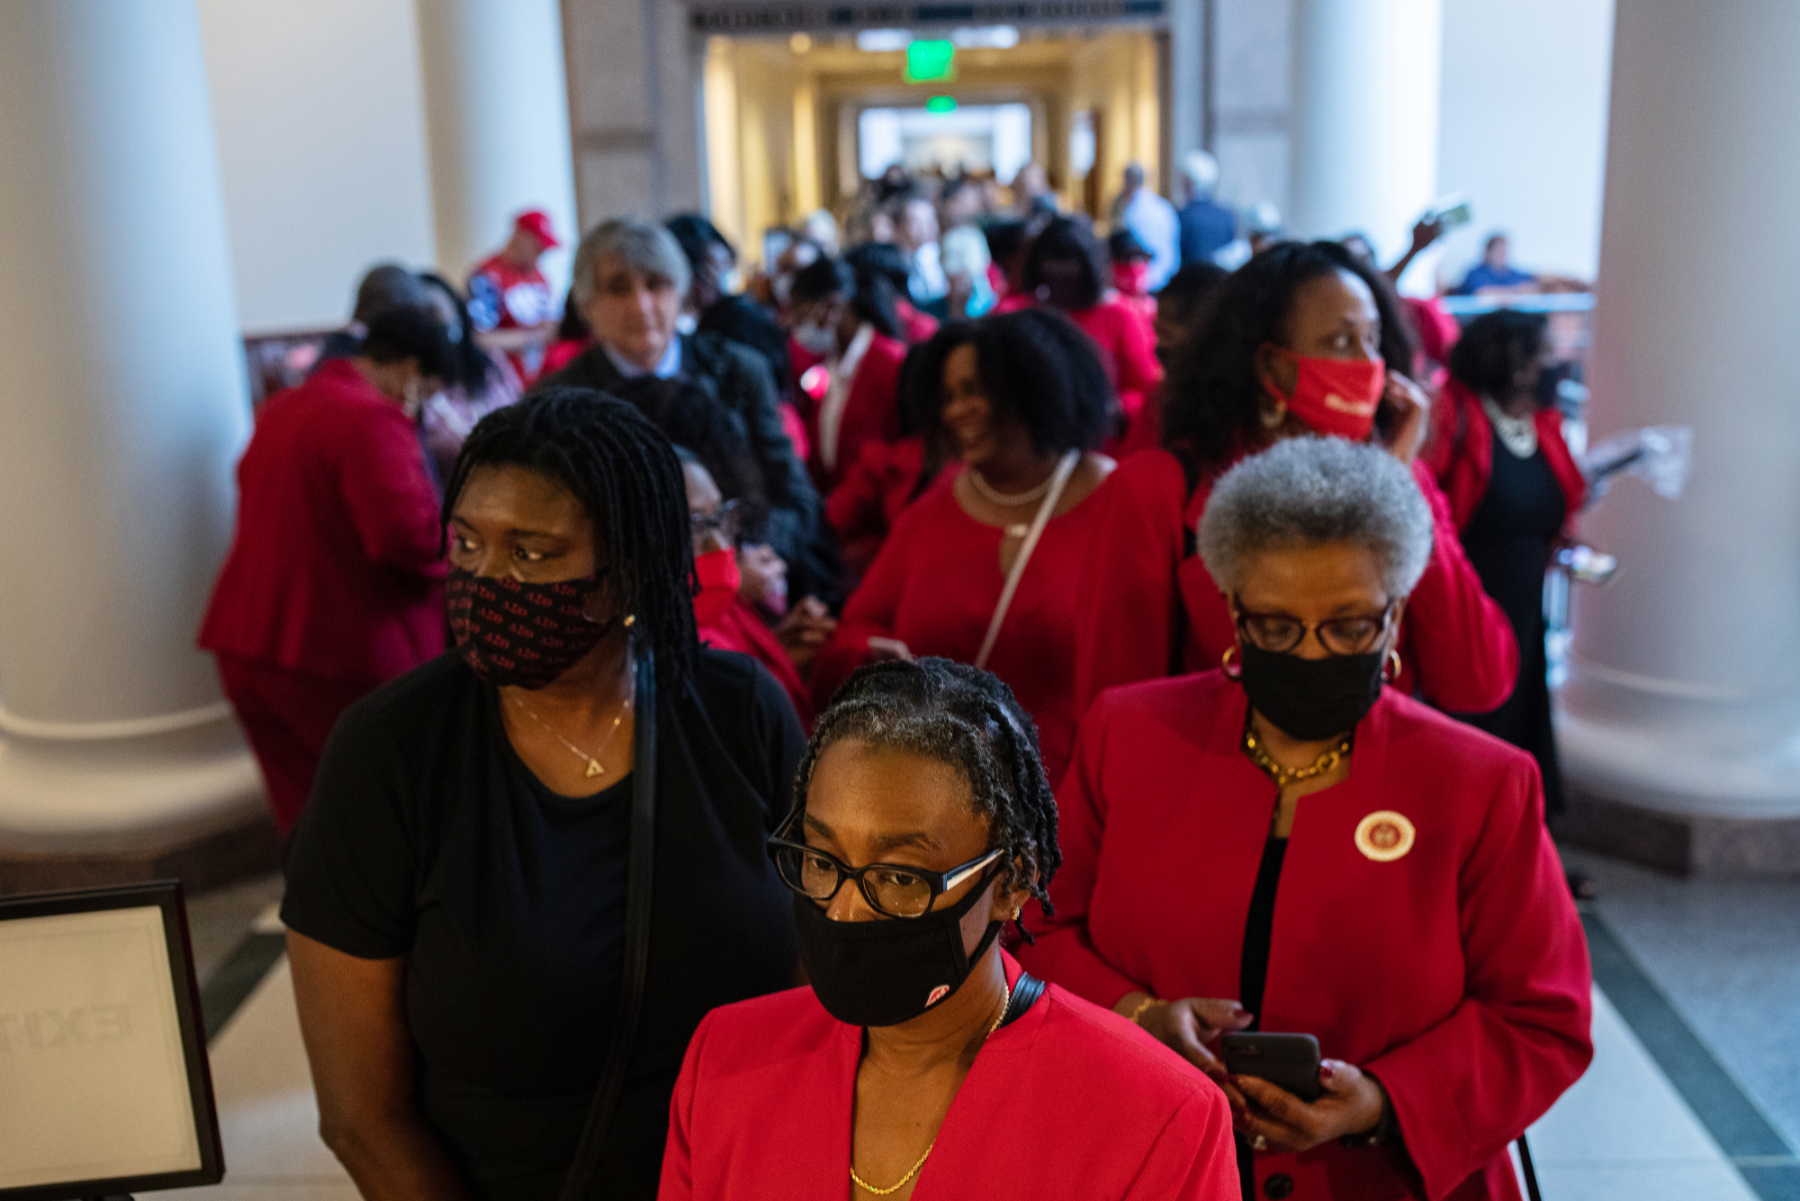 Women dressed in red line up to testify before the TexasHouse Select Committee on Constitutional Rights and Remedies, which began hearings on bail reform and election integrity bills.